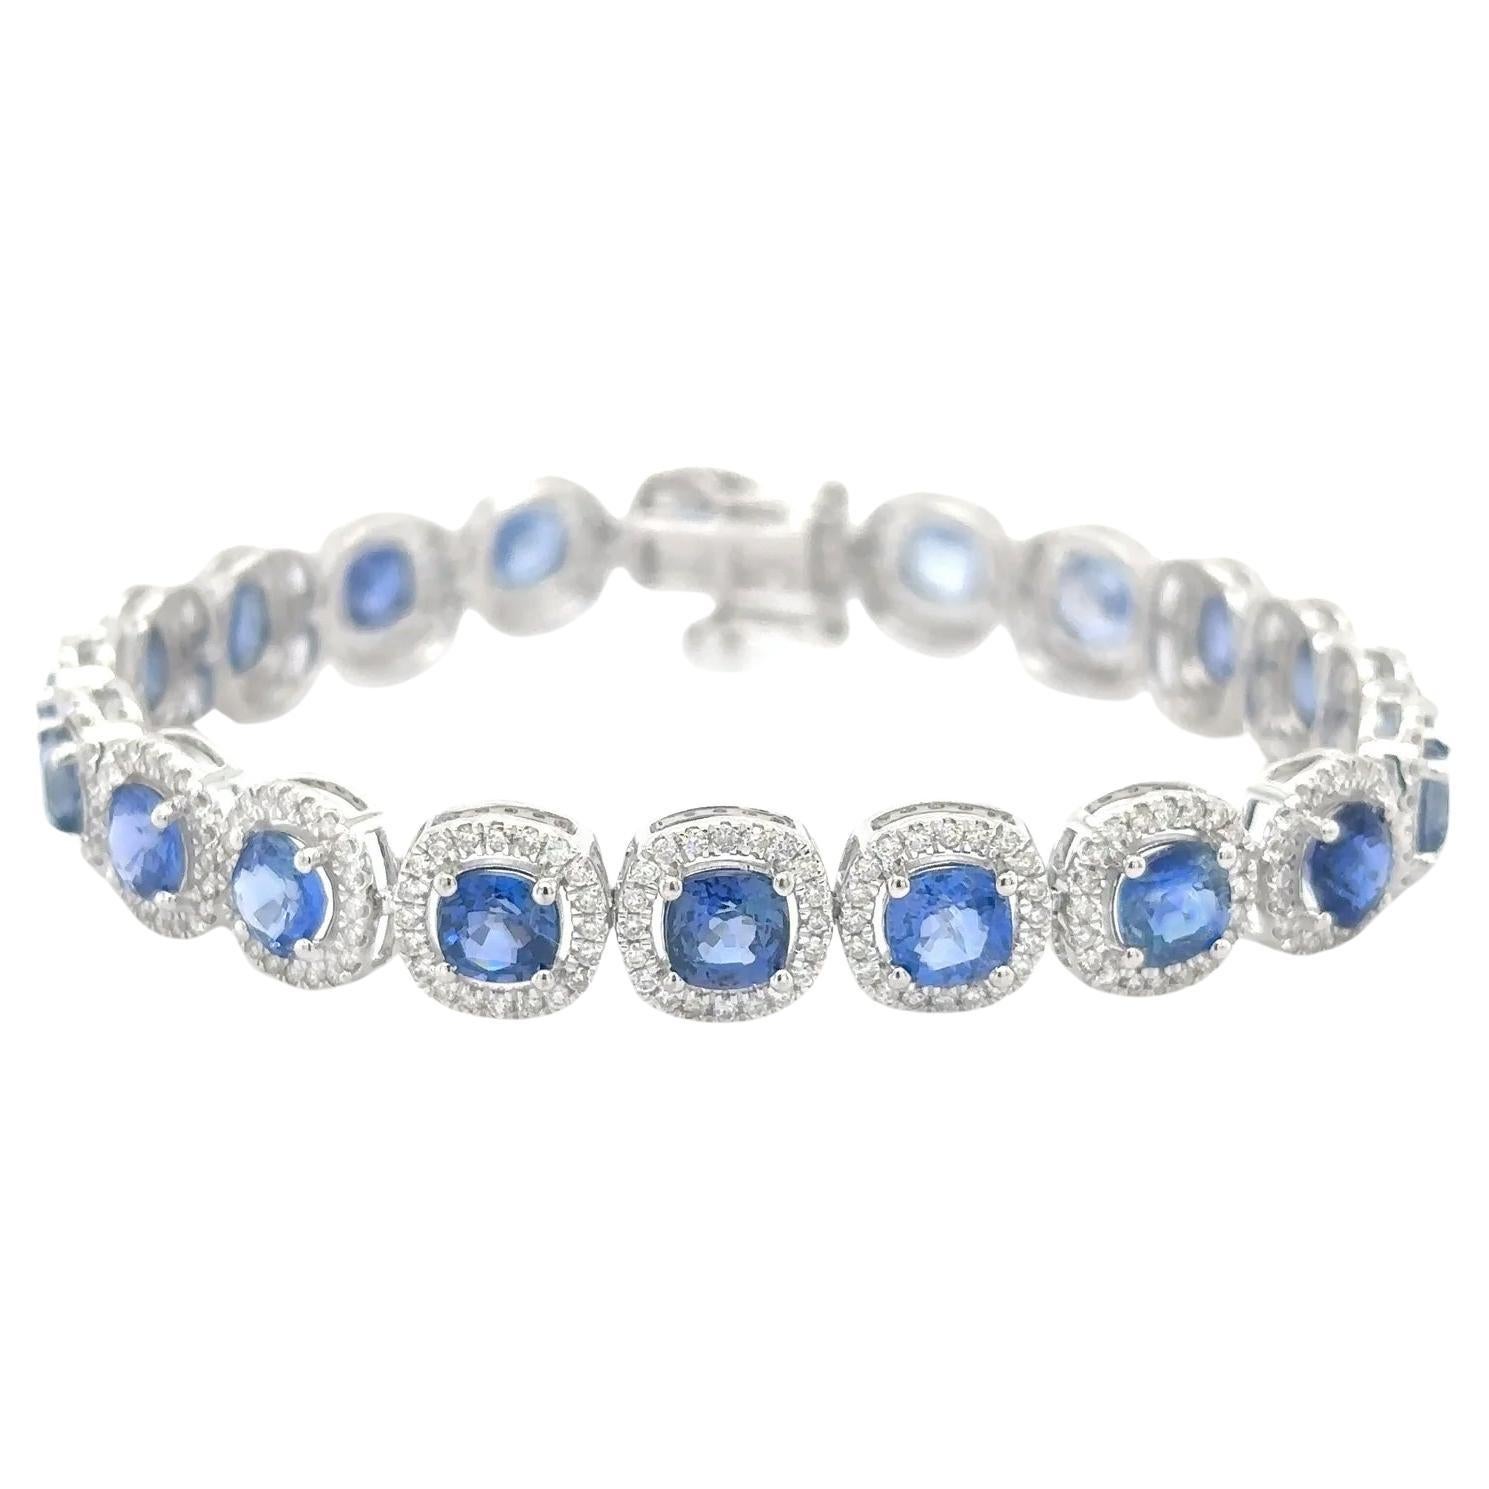 Sapphire Bracelet With Diamonds 17.36 Carats 14K White Gold For Sale